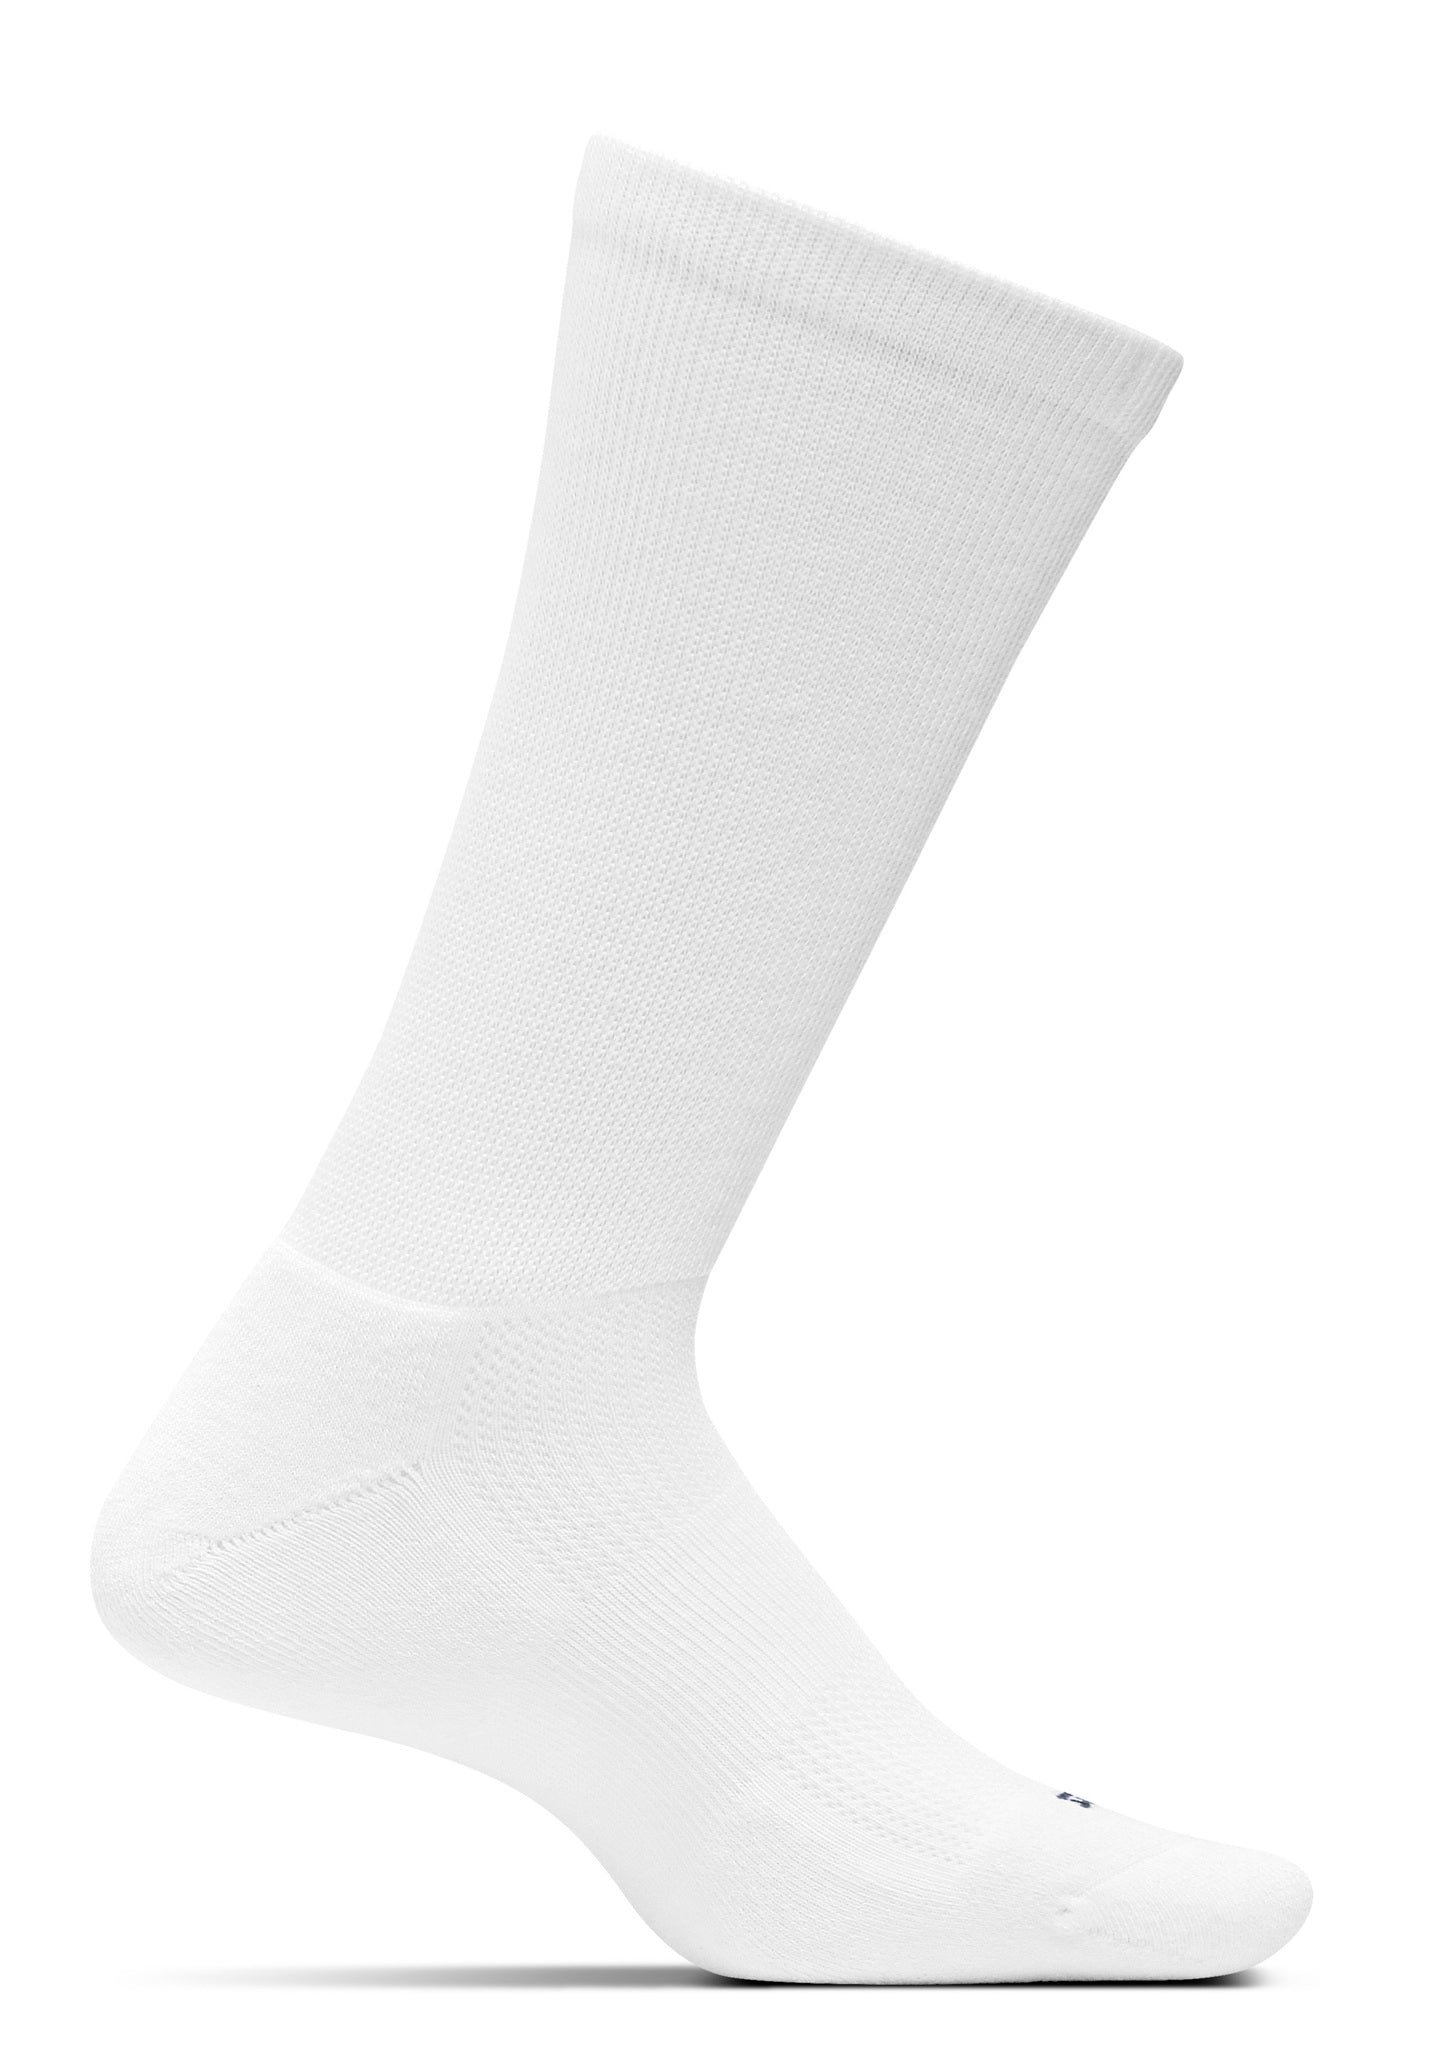 Medial view of the Feetures Diabetic Crew sock in the color white